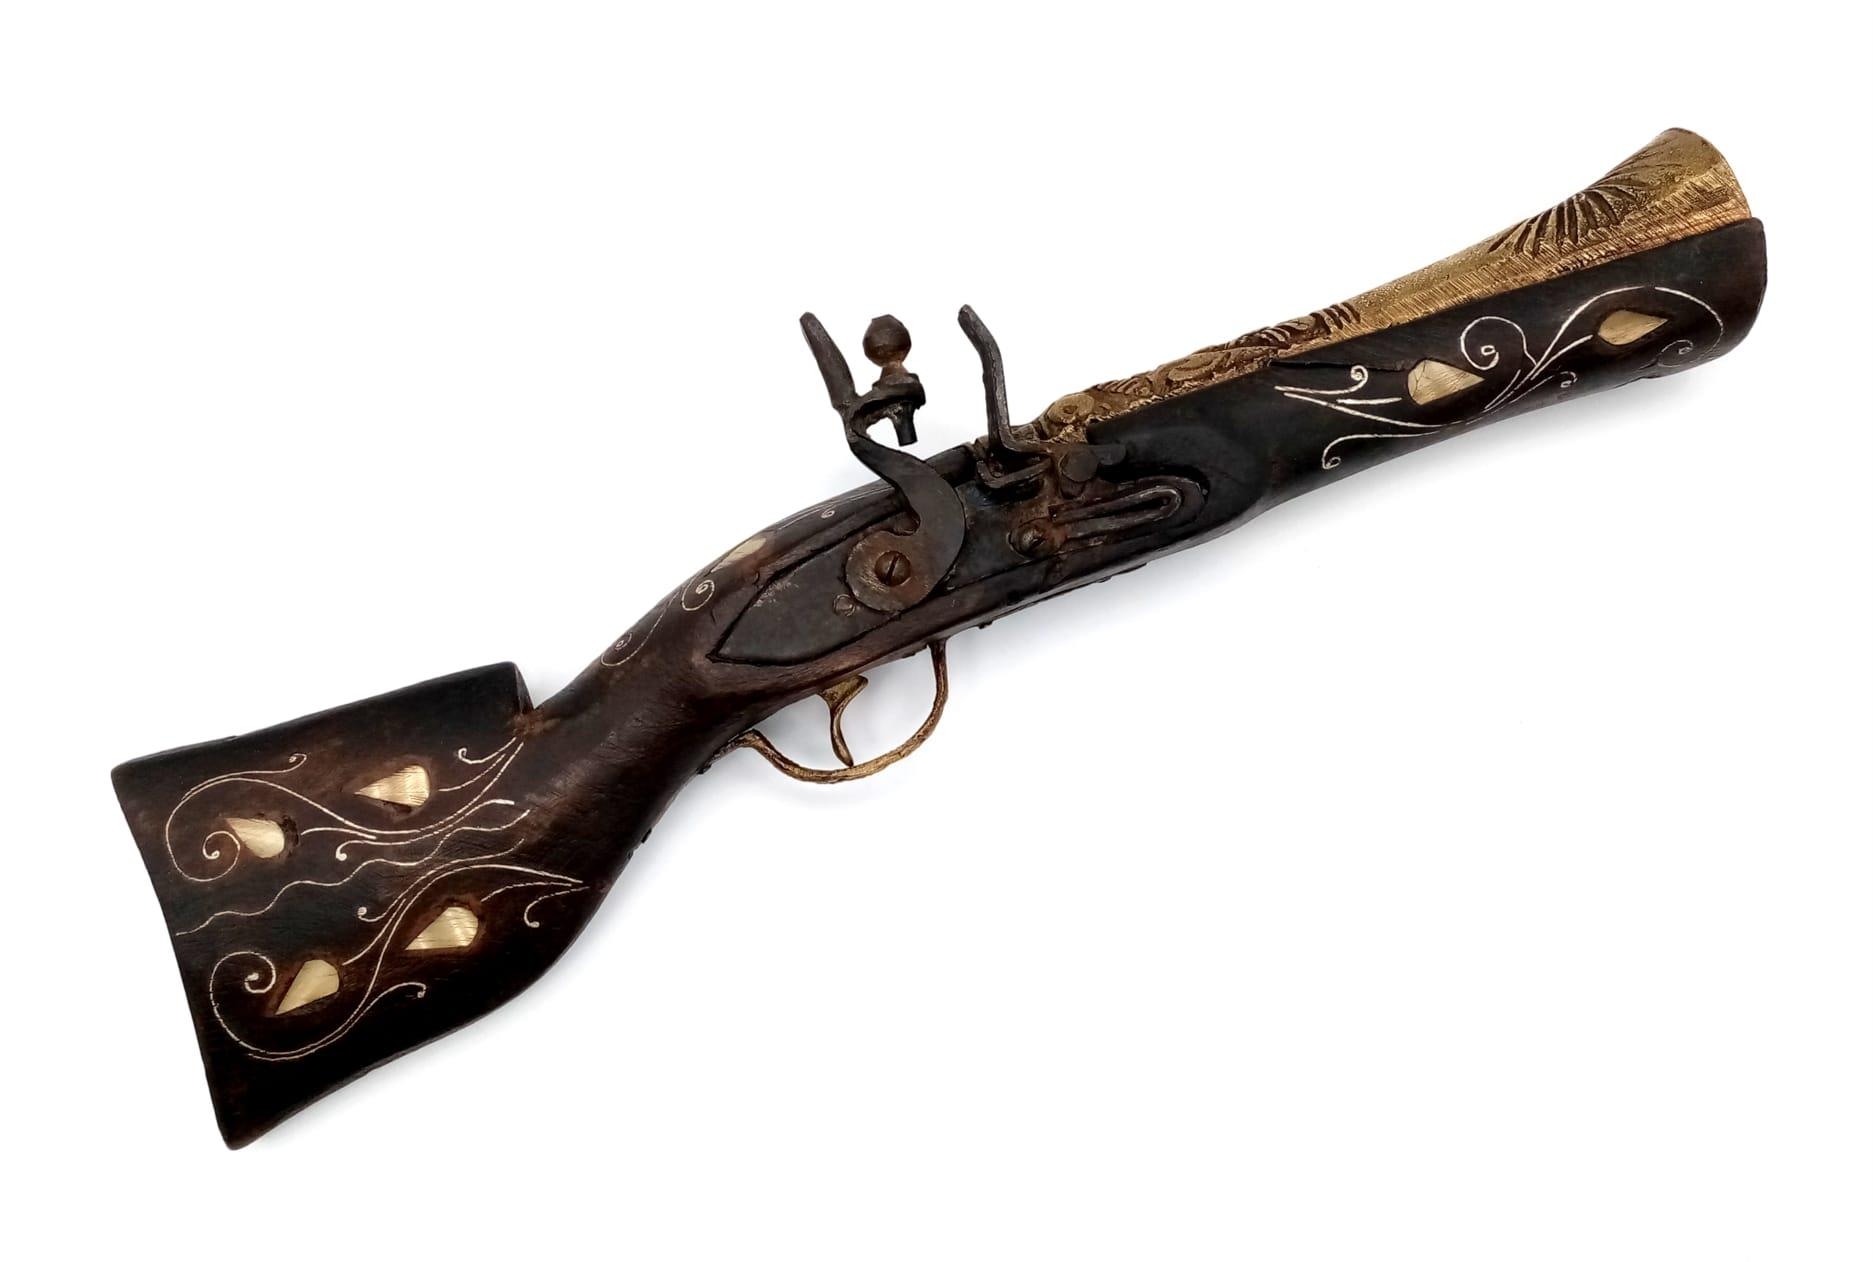 A Vintage Decorative Wood and Metal Eastern Blunderbuss Flintlock with Inlaid Mother of Pearl.